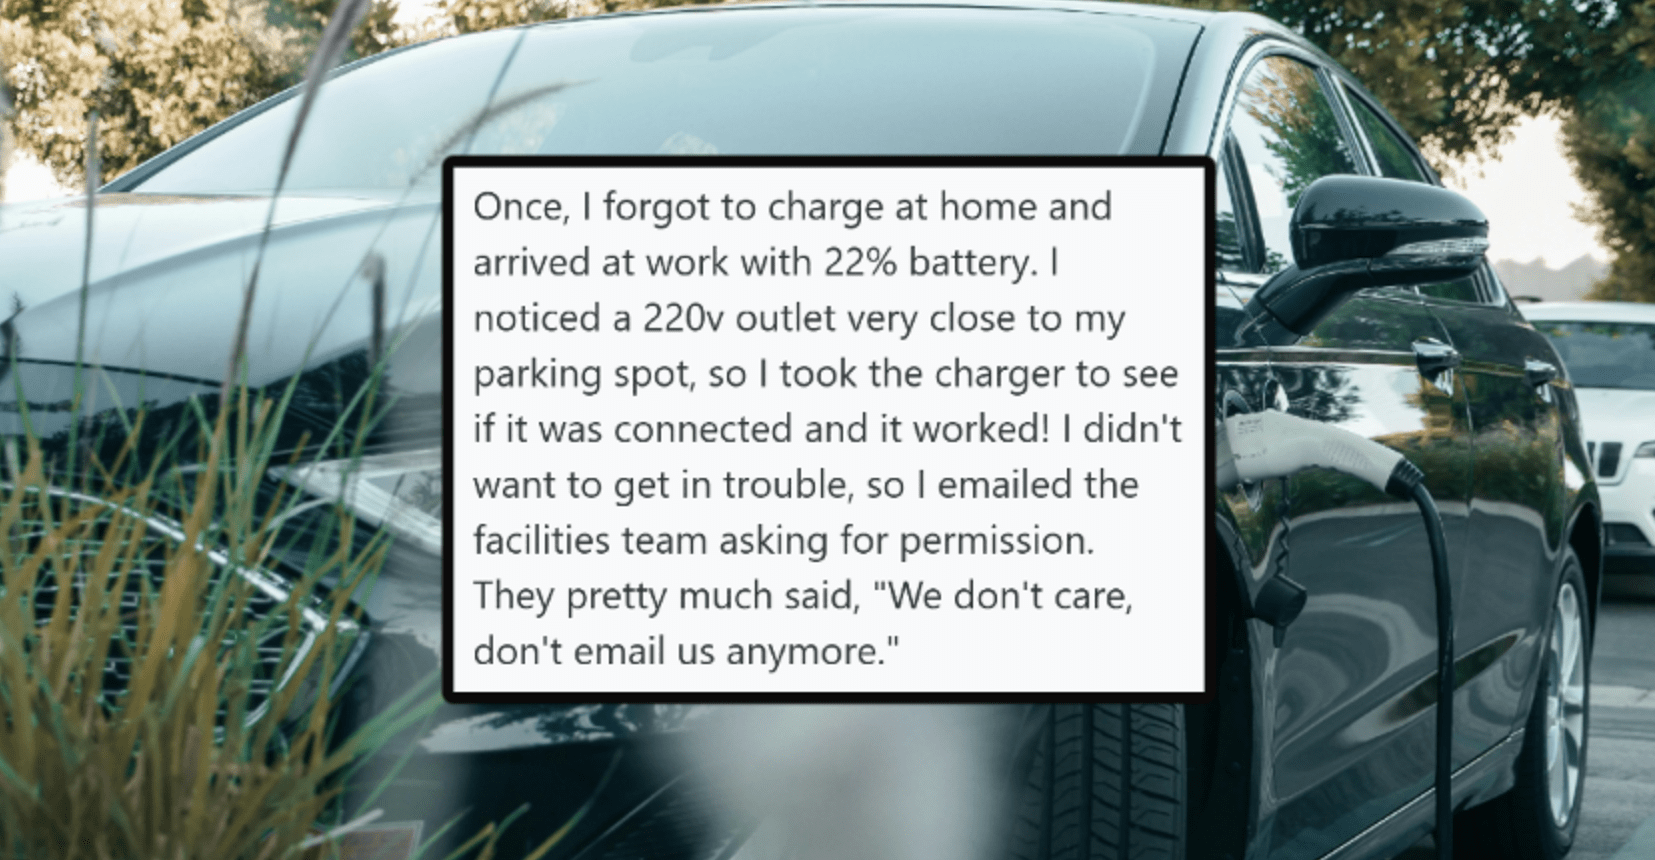 Boomer employee threatens to sue company for free gas because coworkers ...